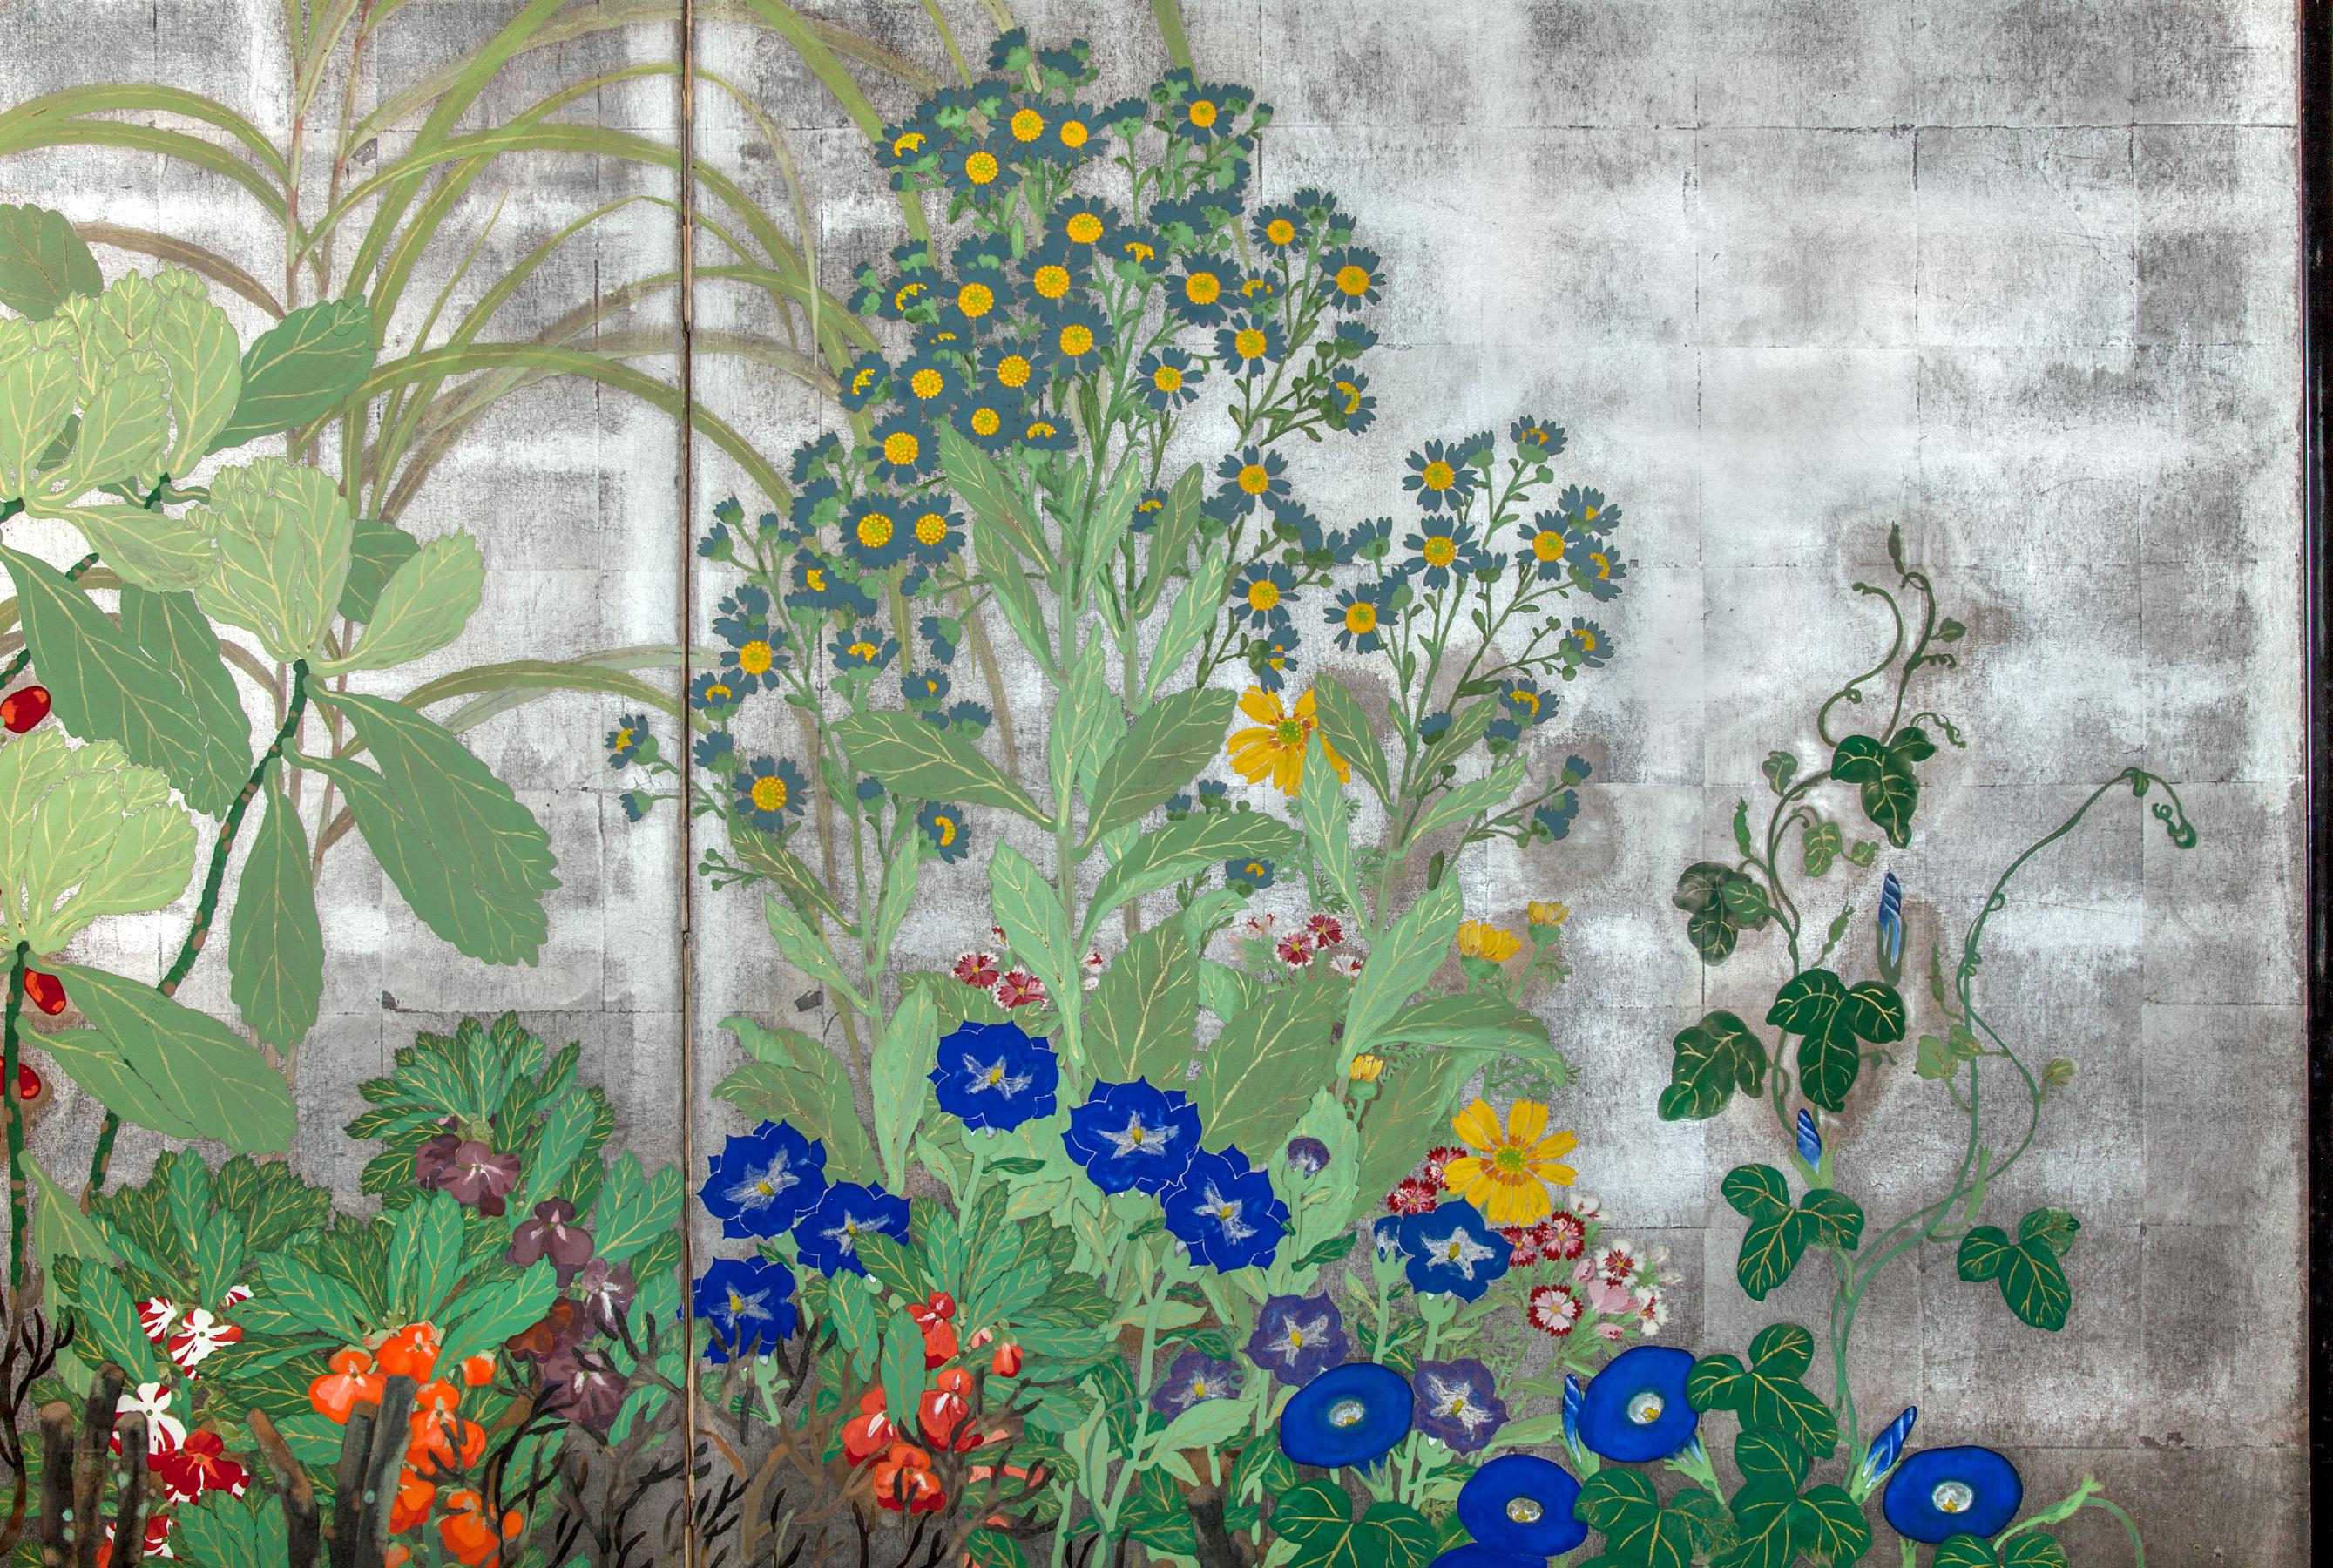 Japanese two panel screen: Summer flowers on silver. Meiji period painting (1868 - 1912) of Summer flowers including morning glories and daisies against a garden fence. Signature and seal read: Mukai. Mineral pigments painted on silver leaf. One of